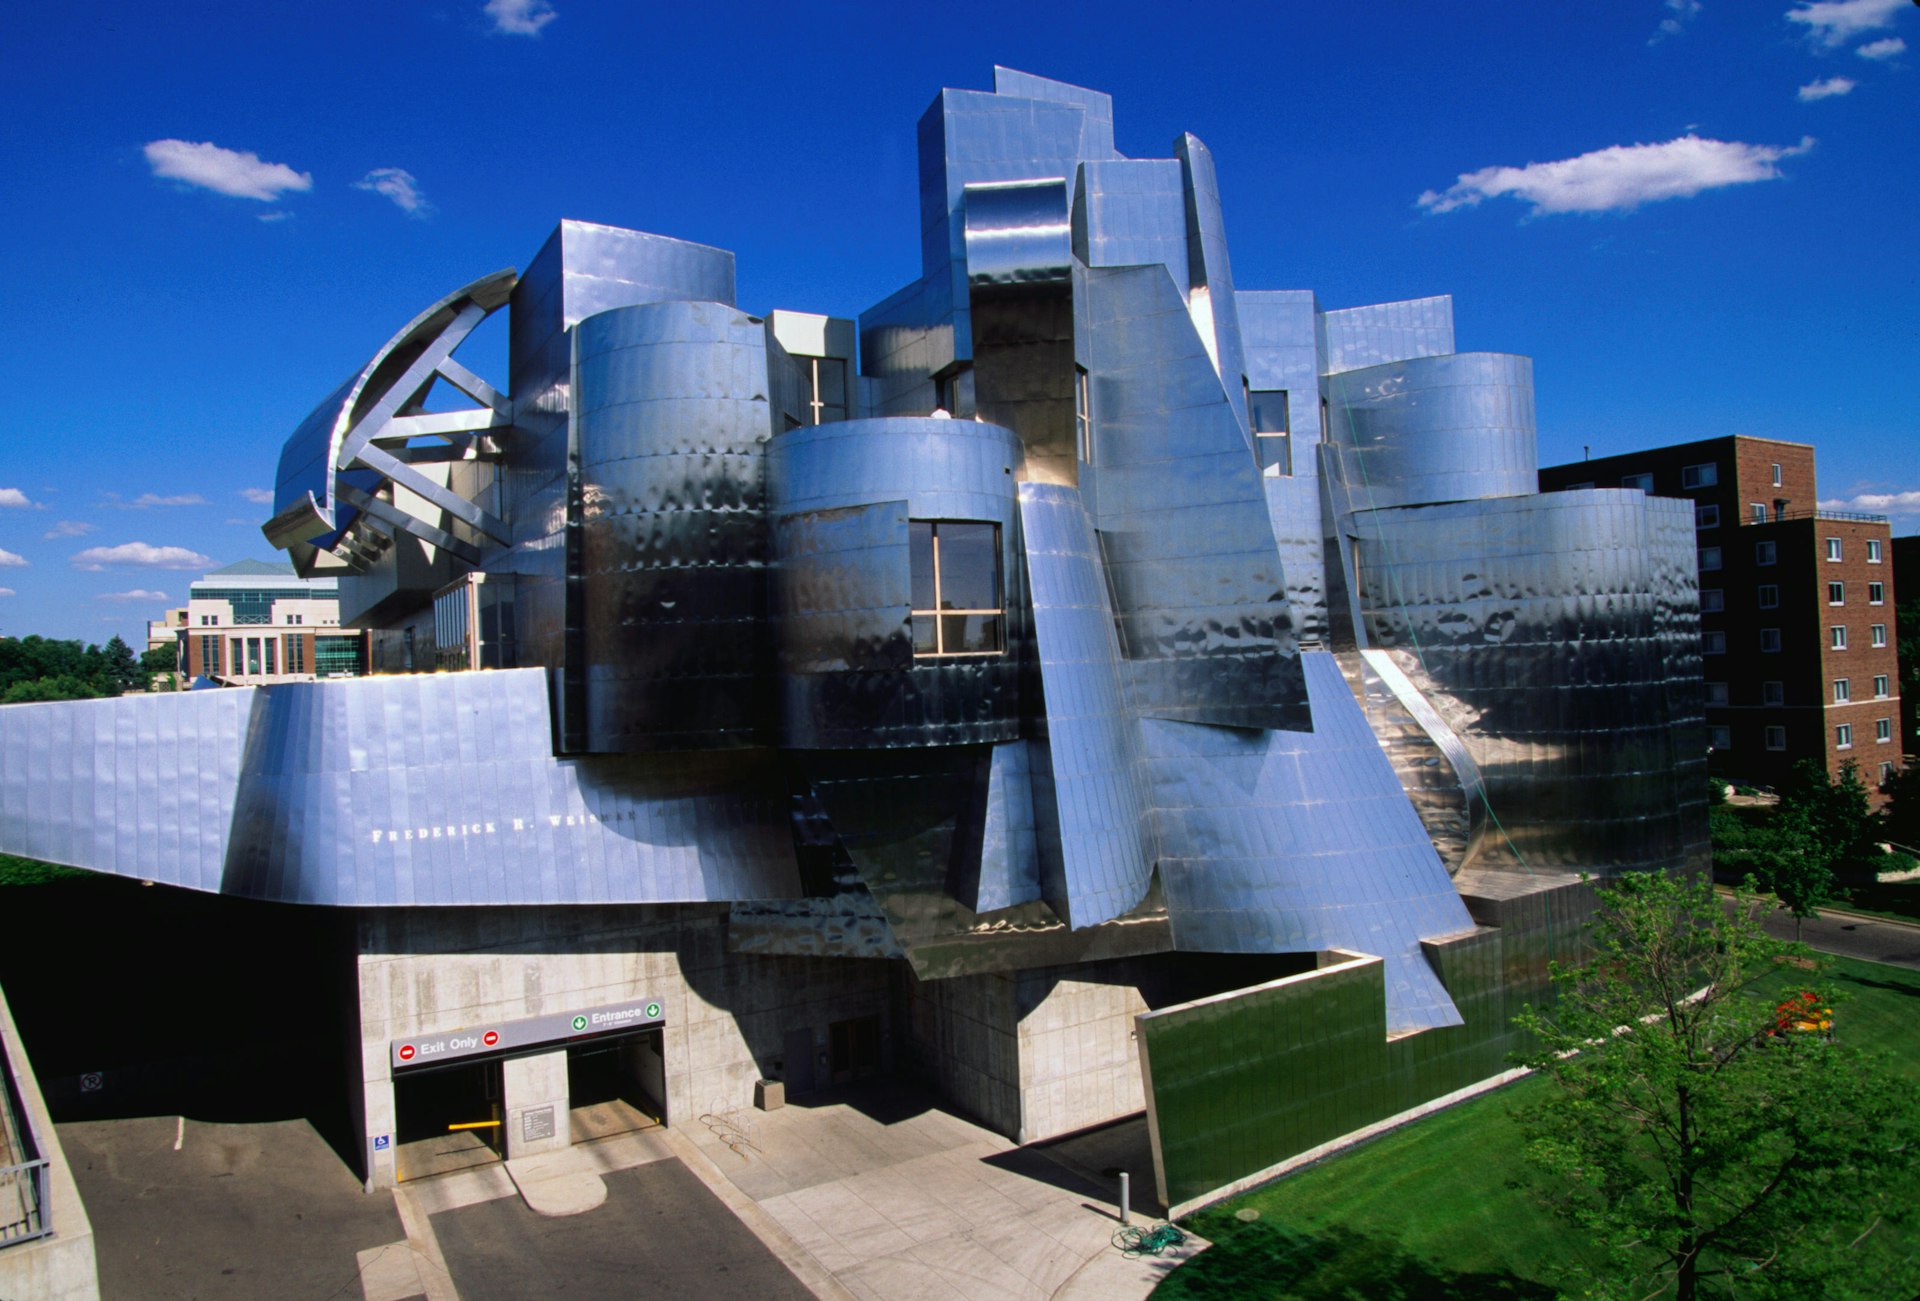 The Weisman Art Museum, set inside a stainless steel structure by architect Frank Gehry on the University of Minnesota campus